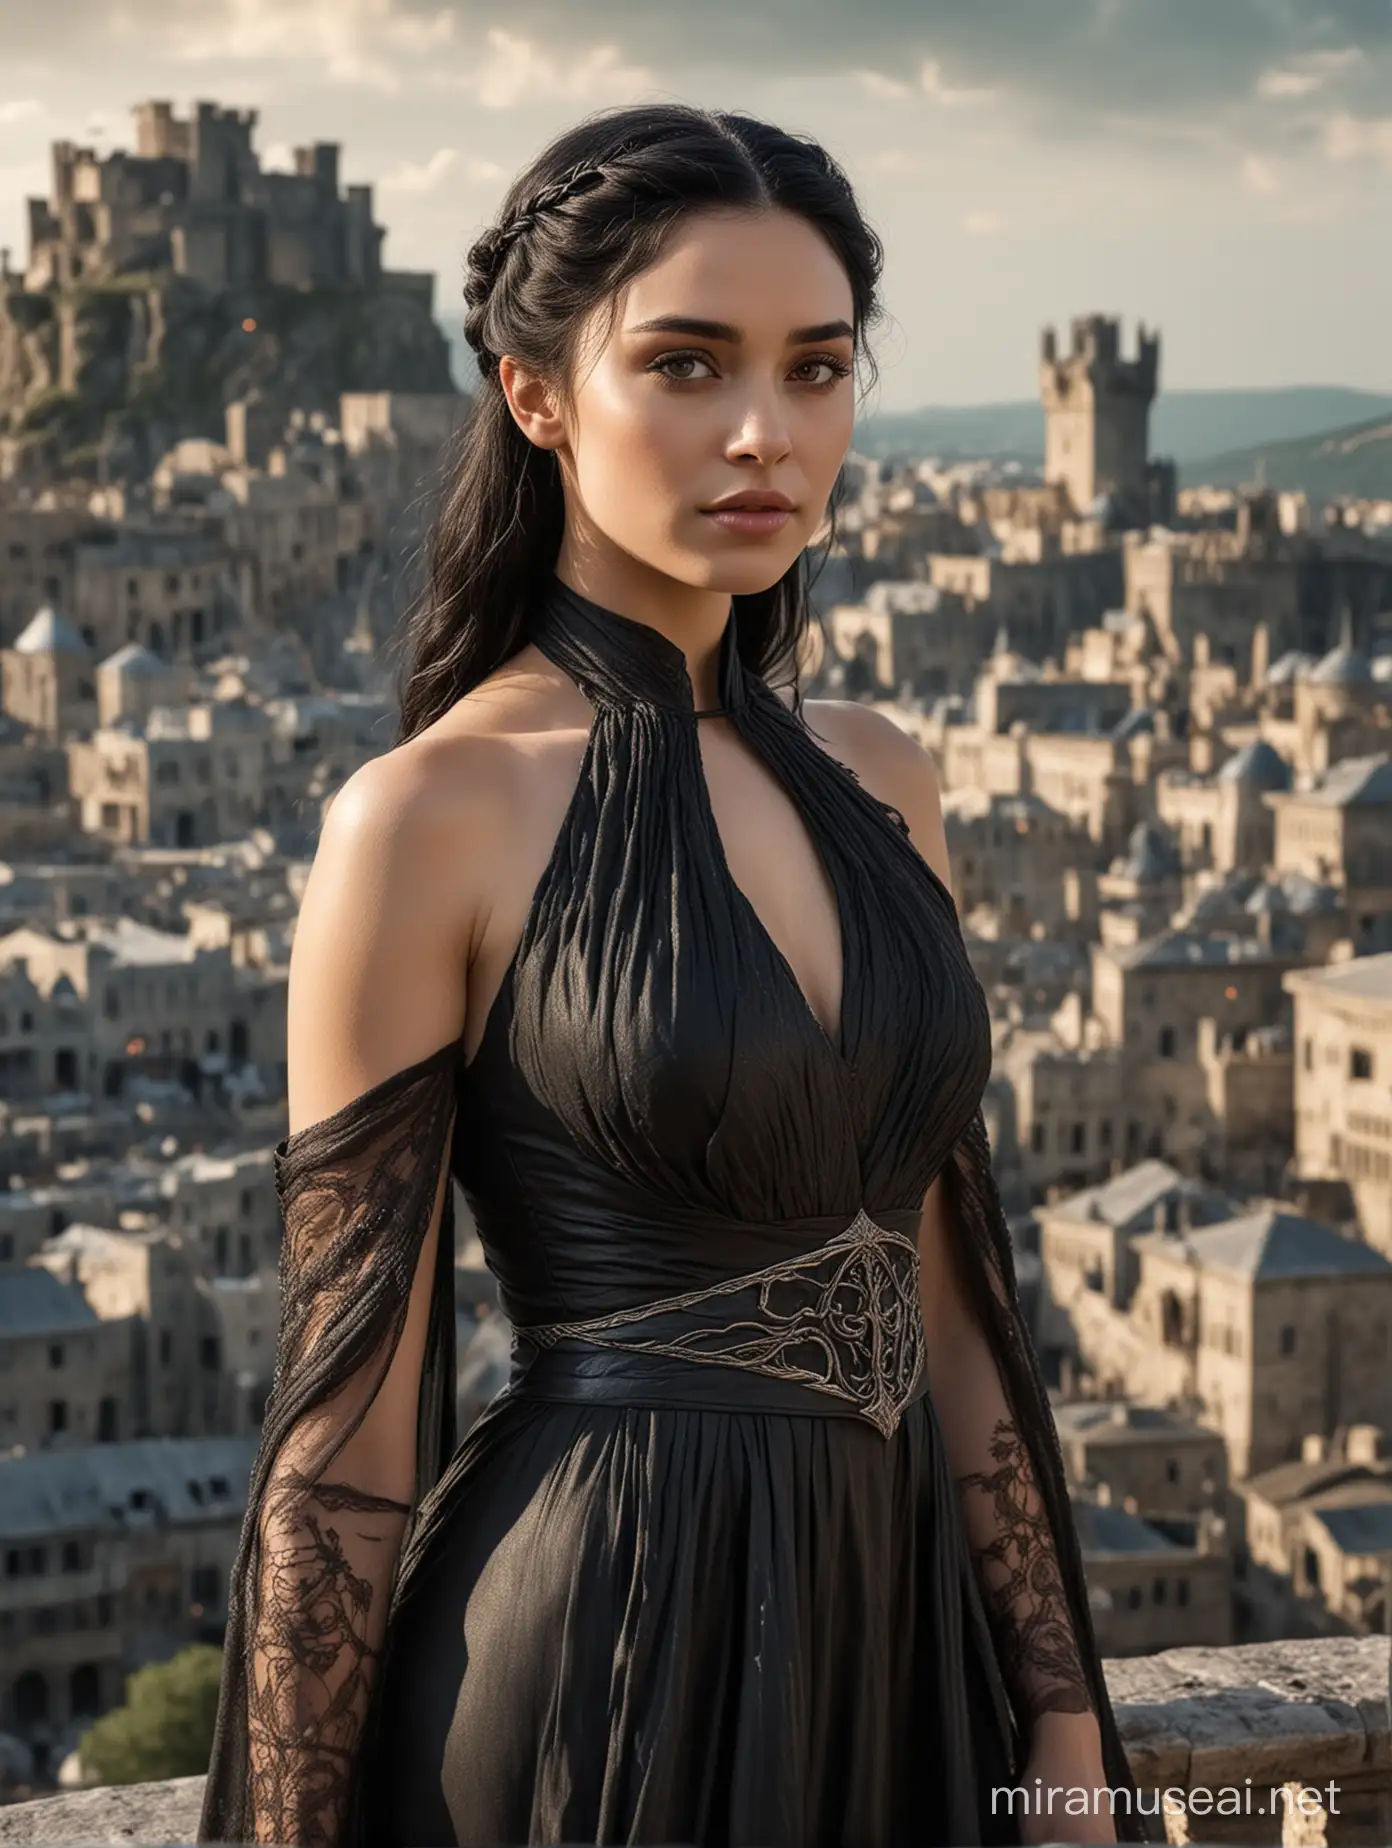 Valyrian woman, valyrian style black hair, cured skin, black valyrian style gown,in the background the city of Valyria 